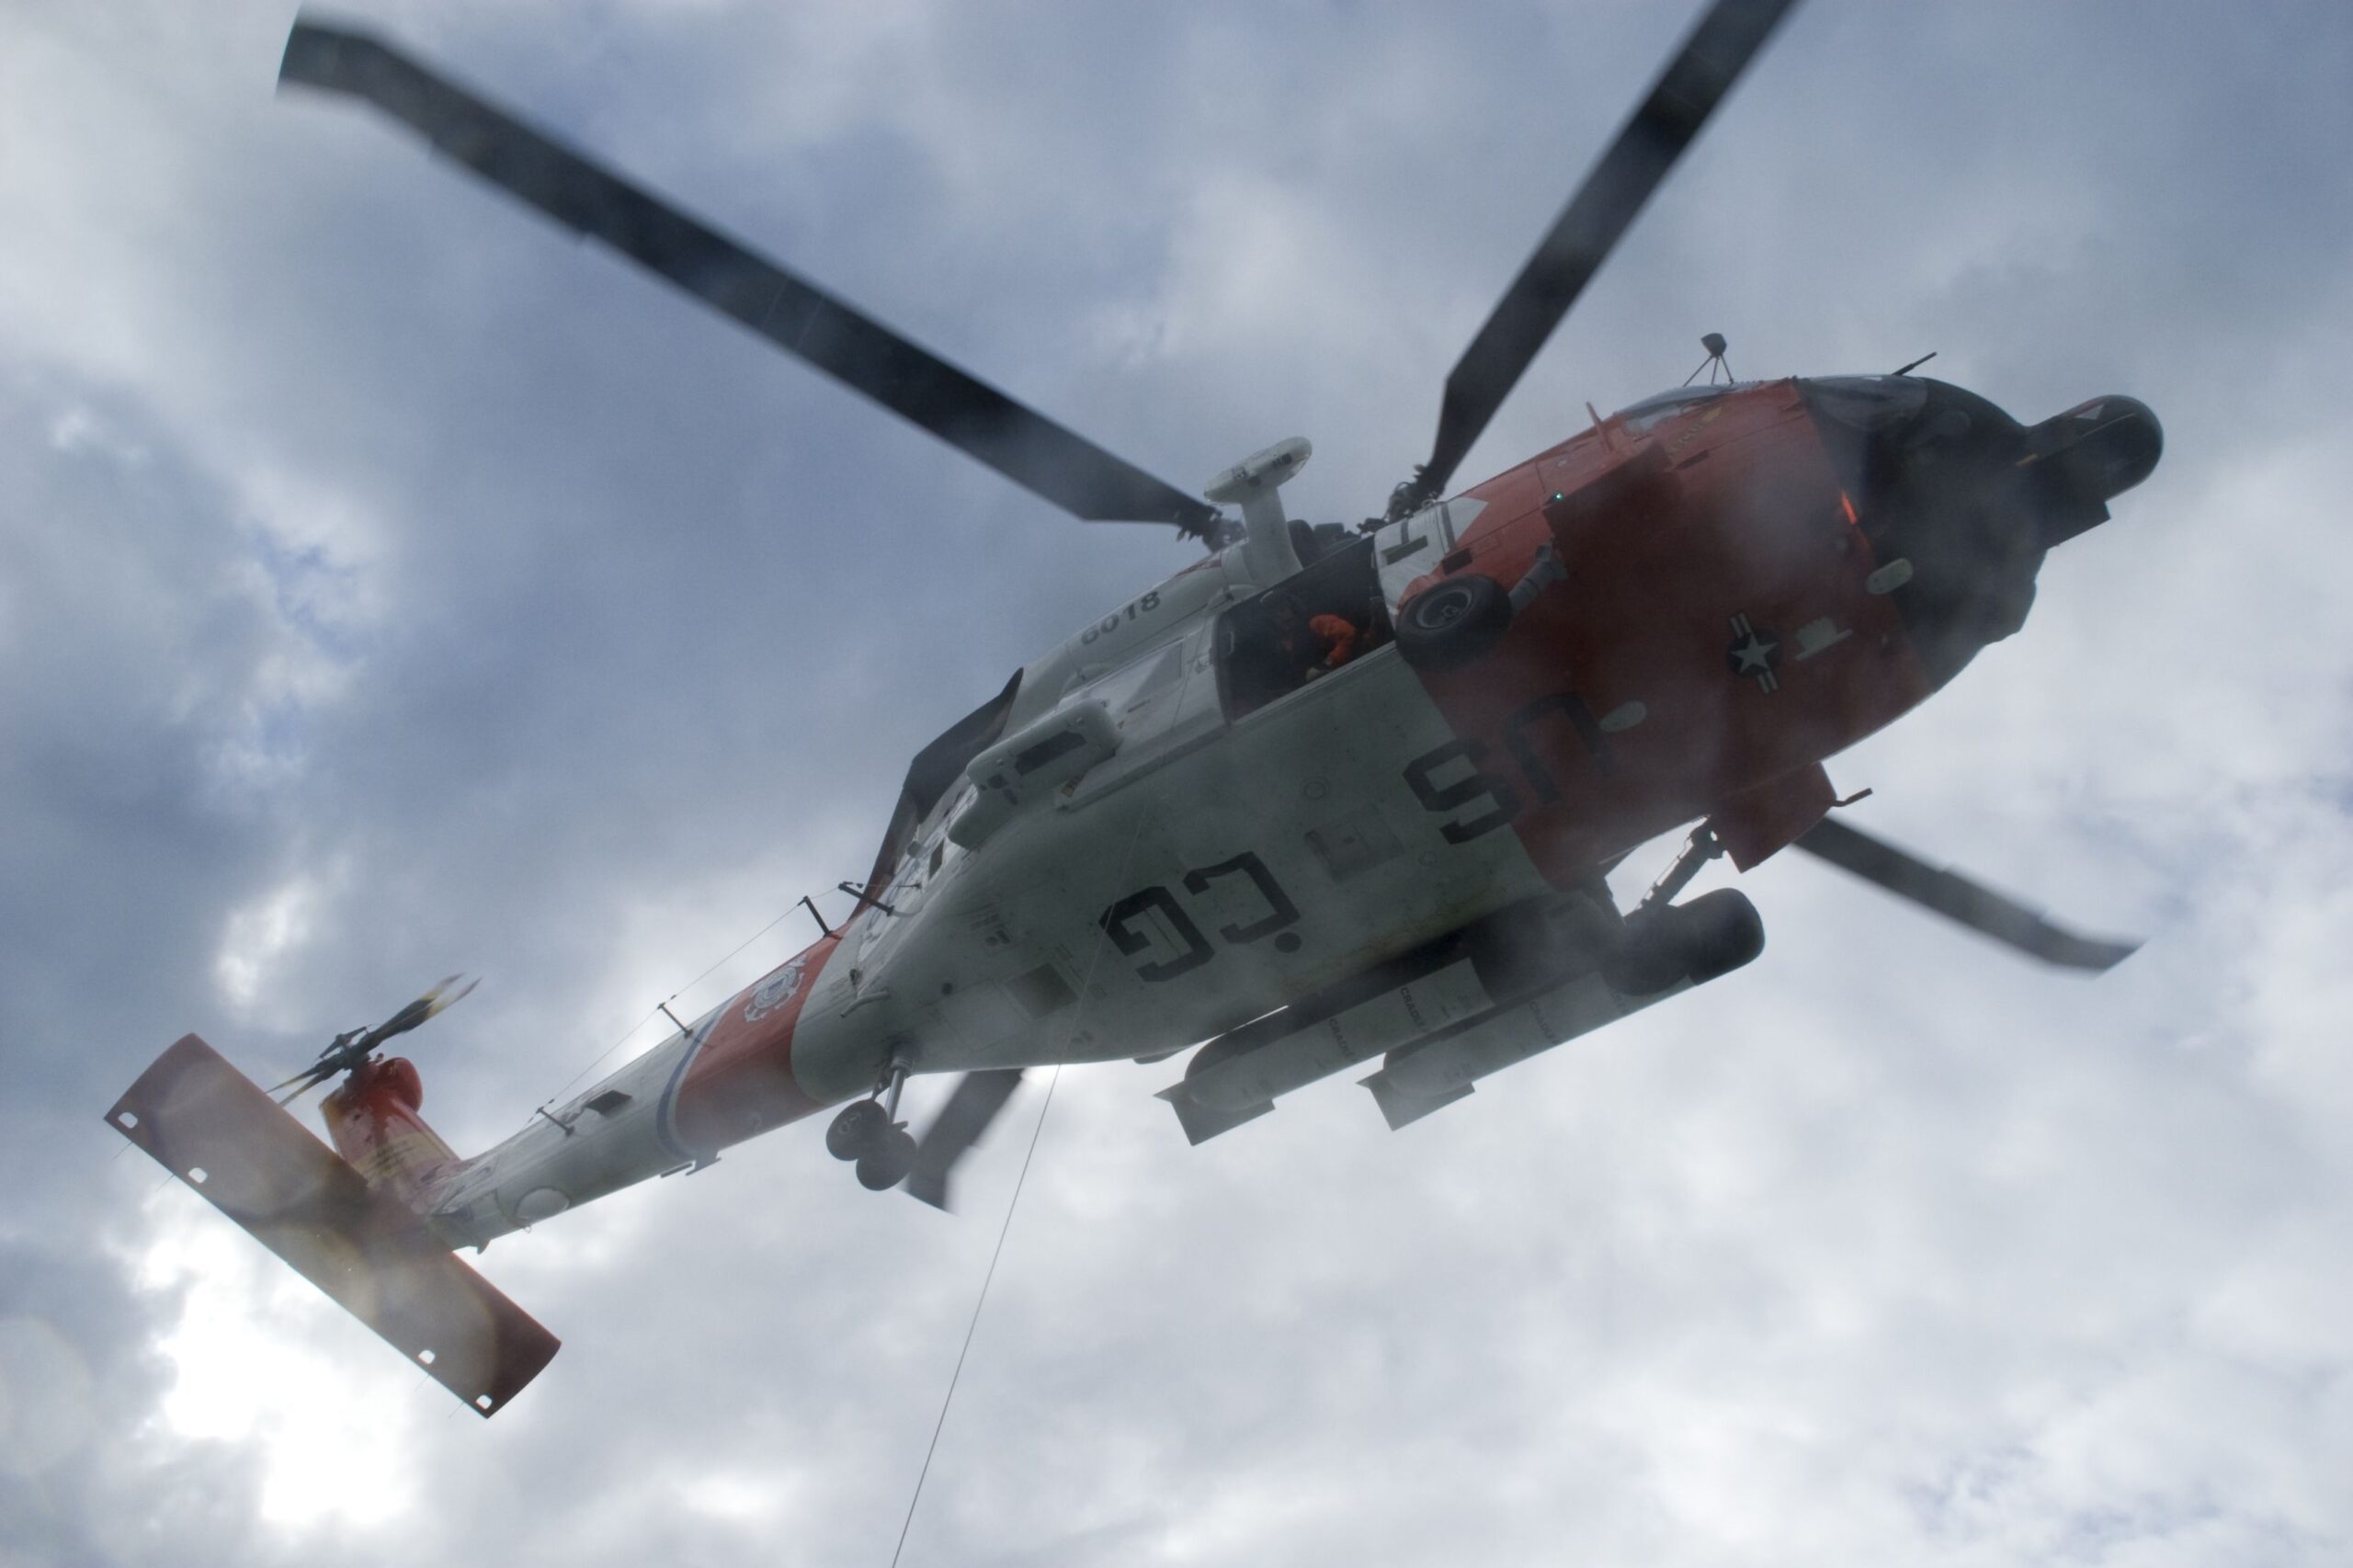 USCG Jayhawk helicopter takes part in training exercise near Juneau.